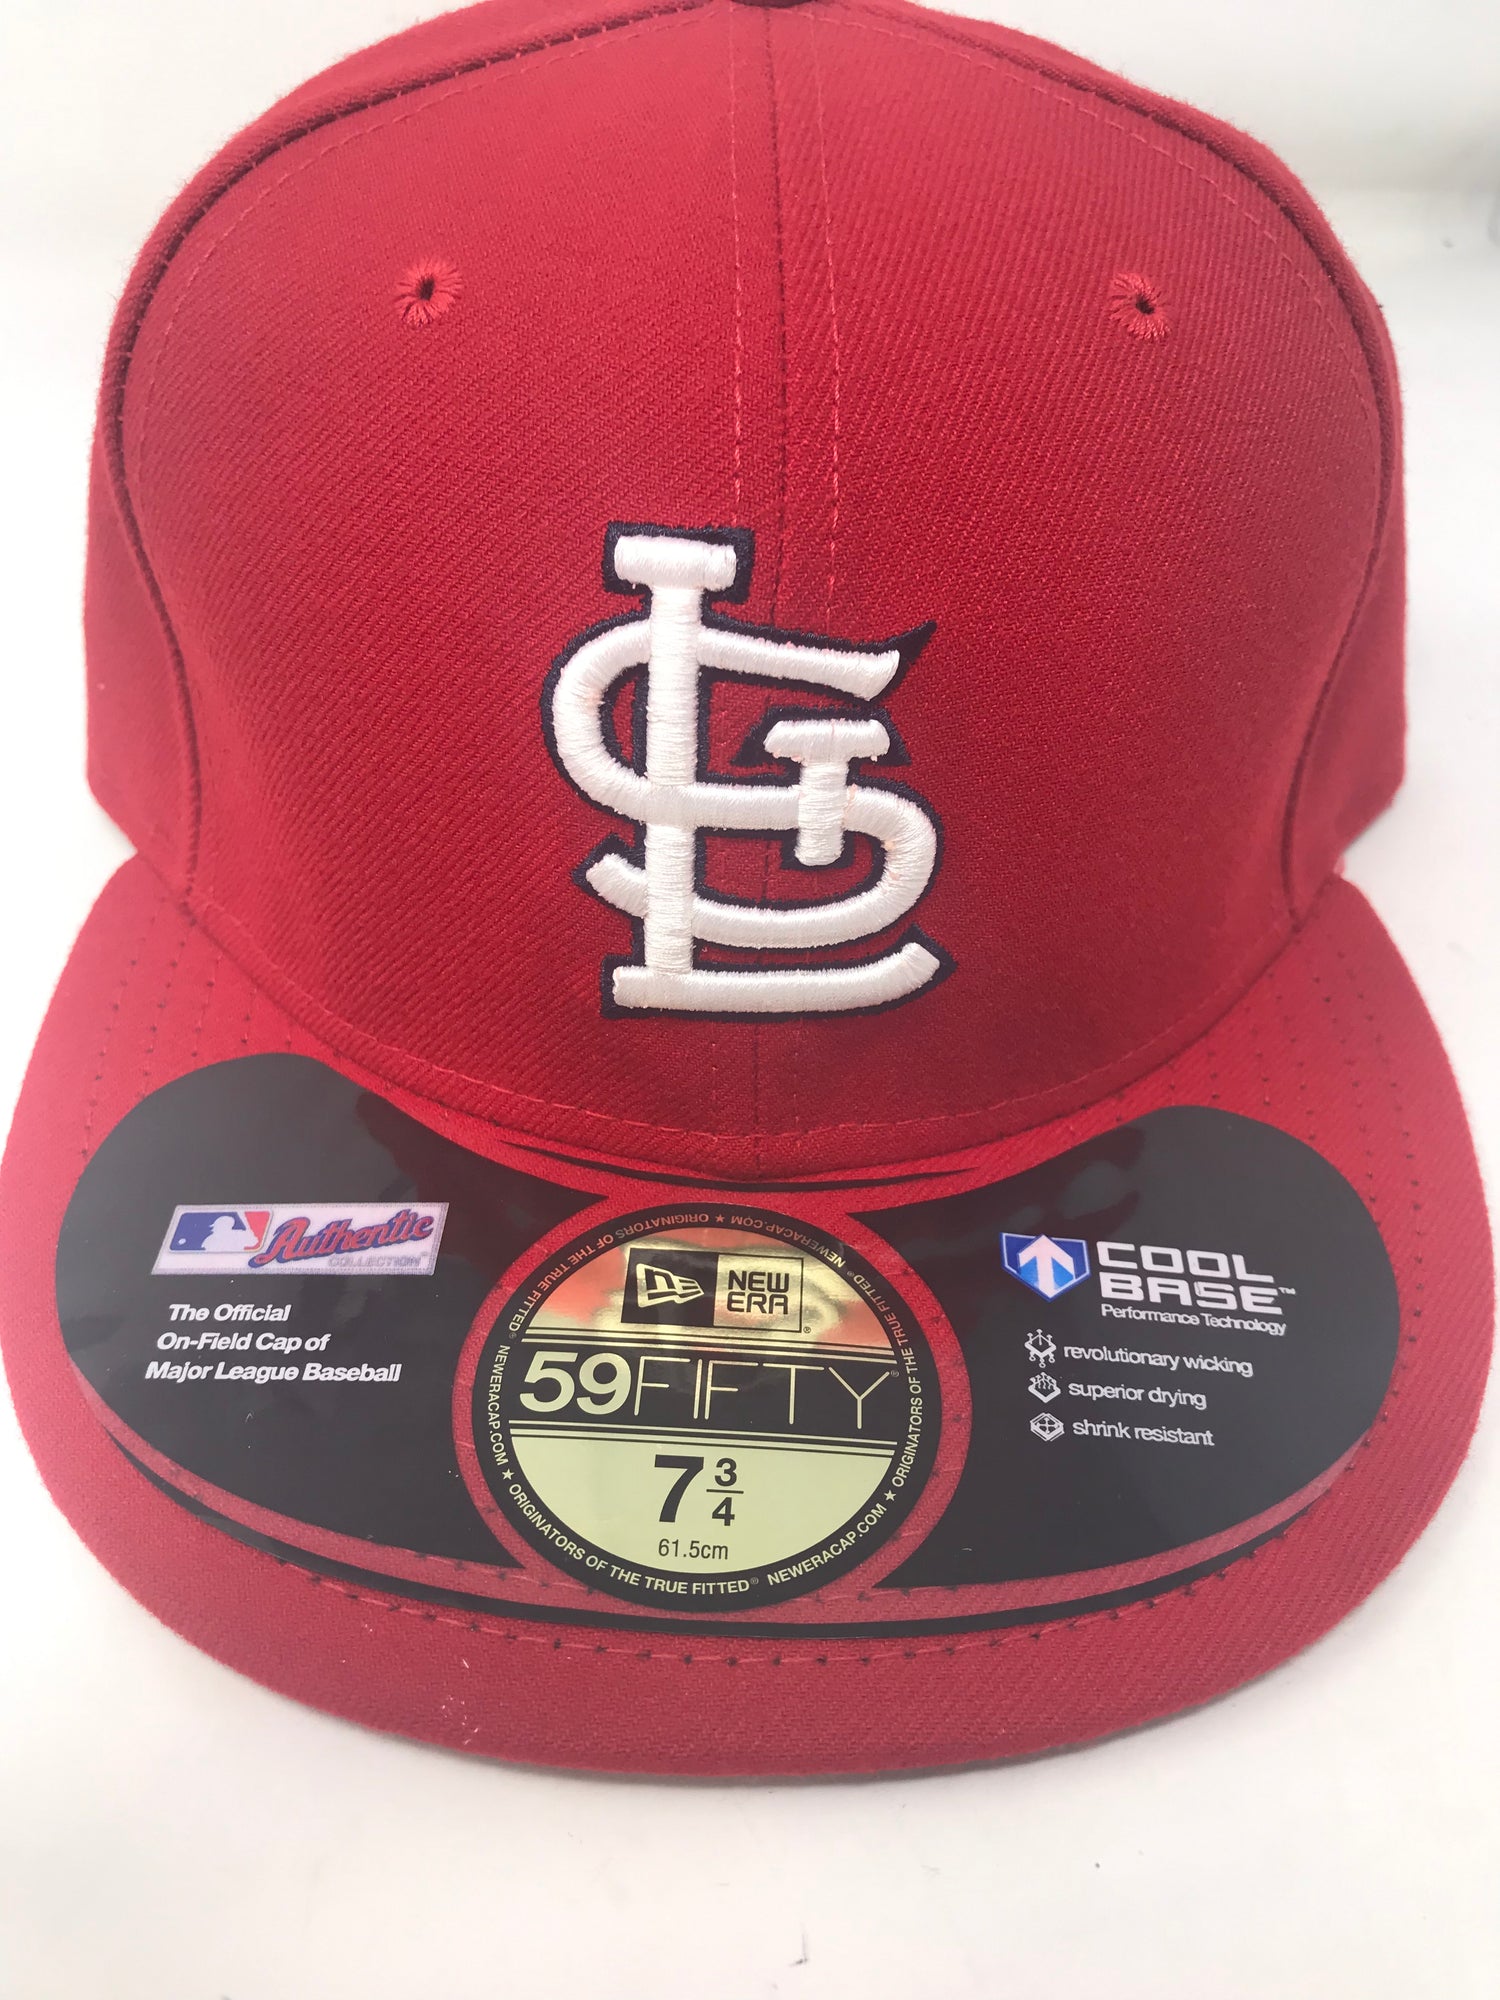 New Era St. Louis Cardinals Red On-Field Authentic Collection 59FIFTY Fitted Hat